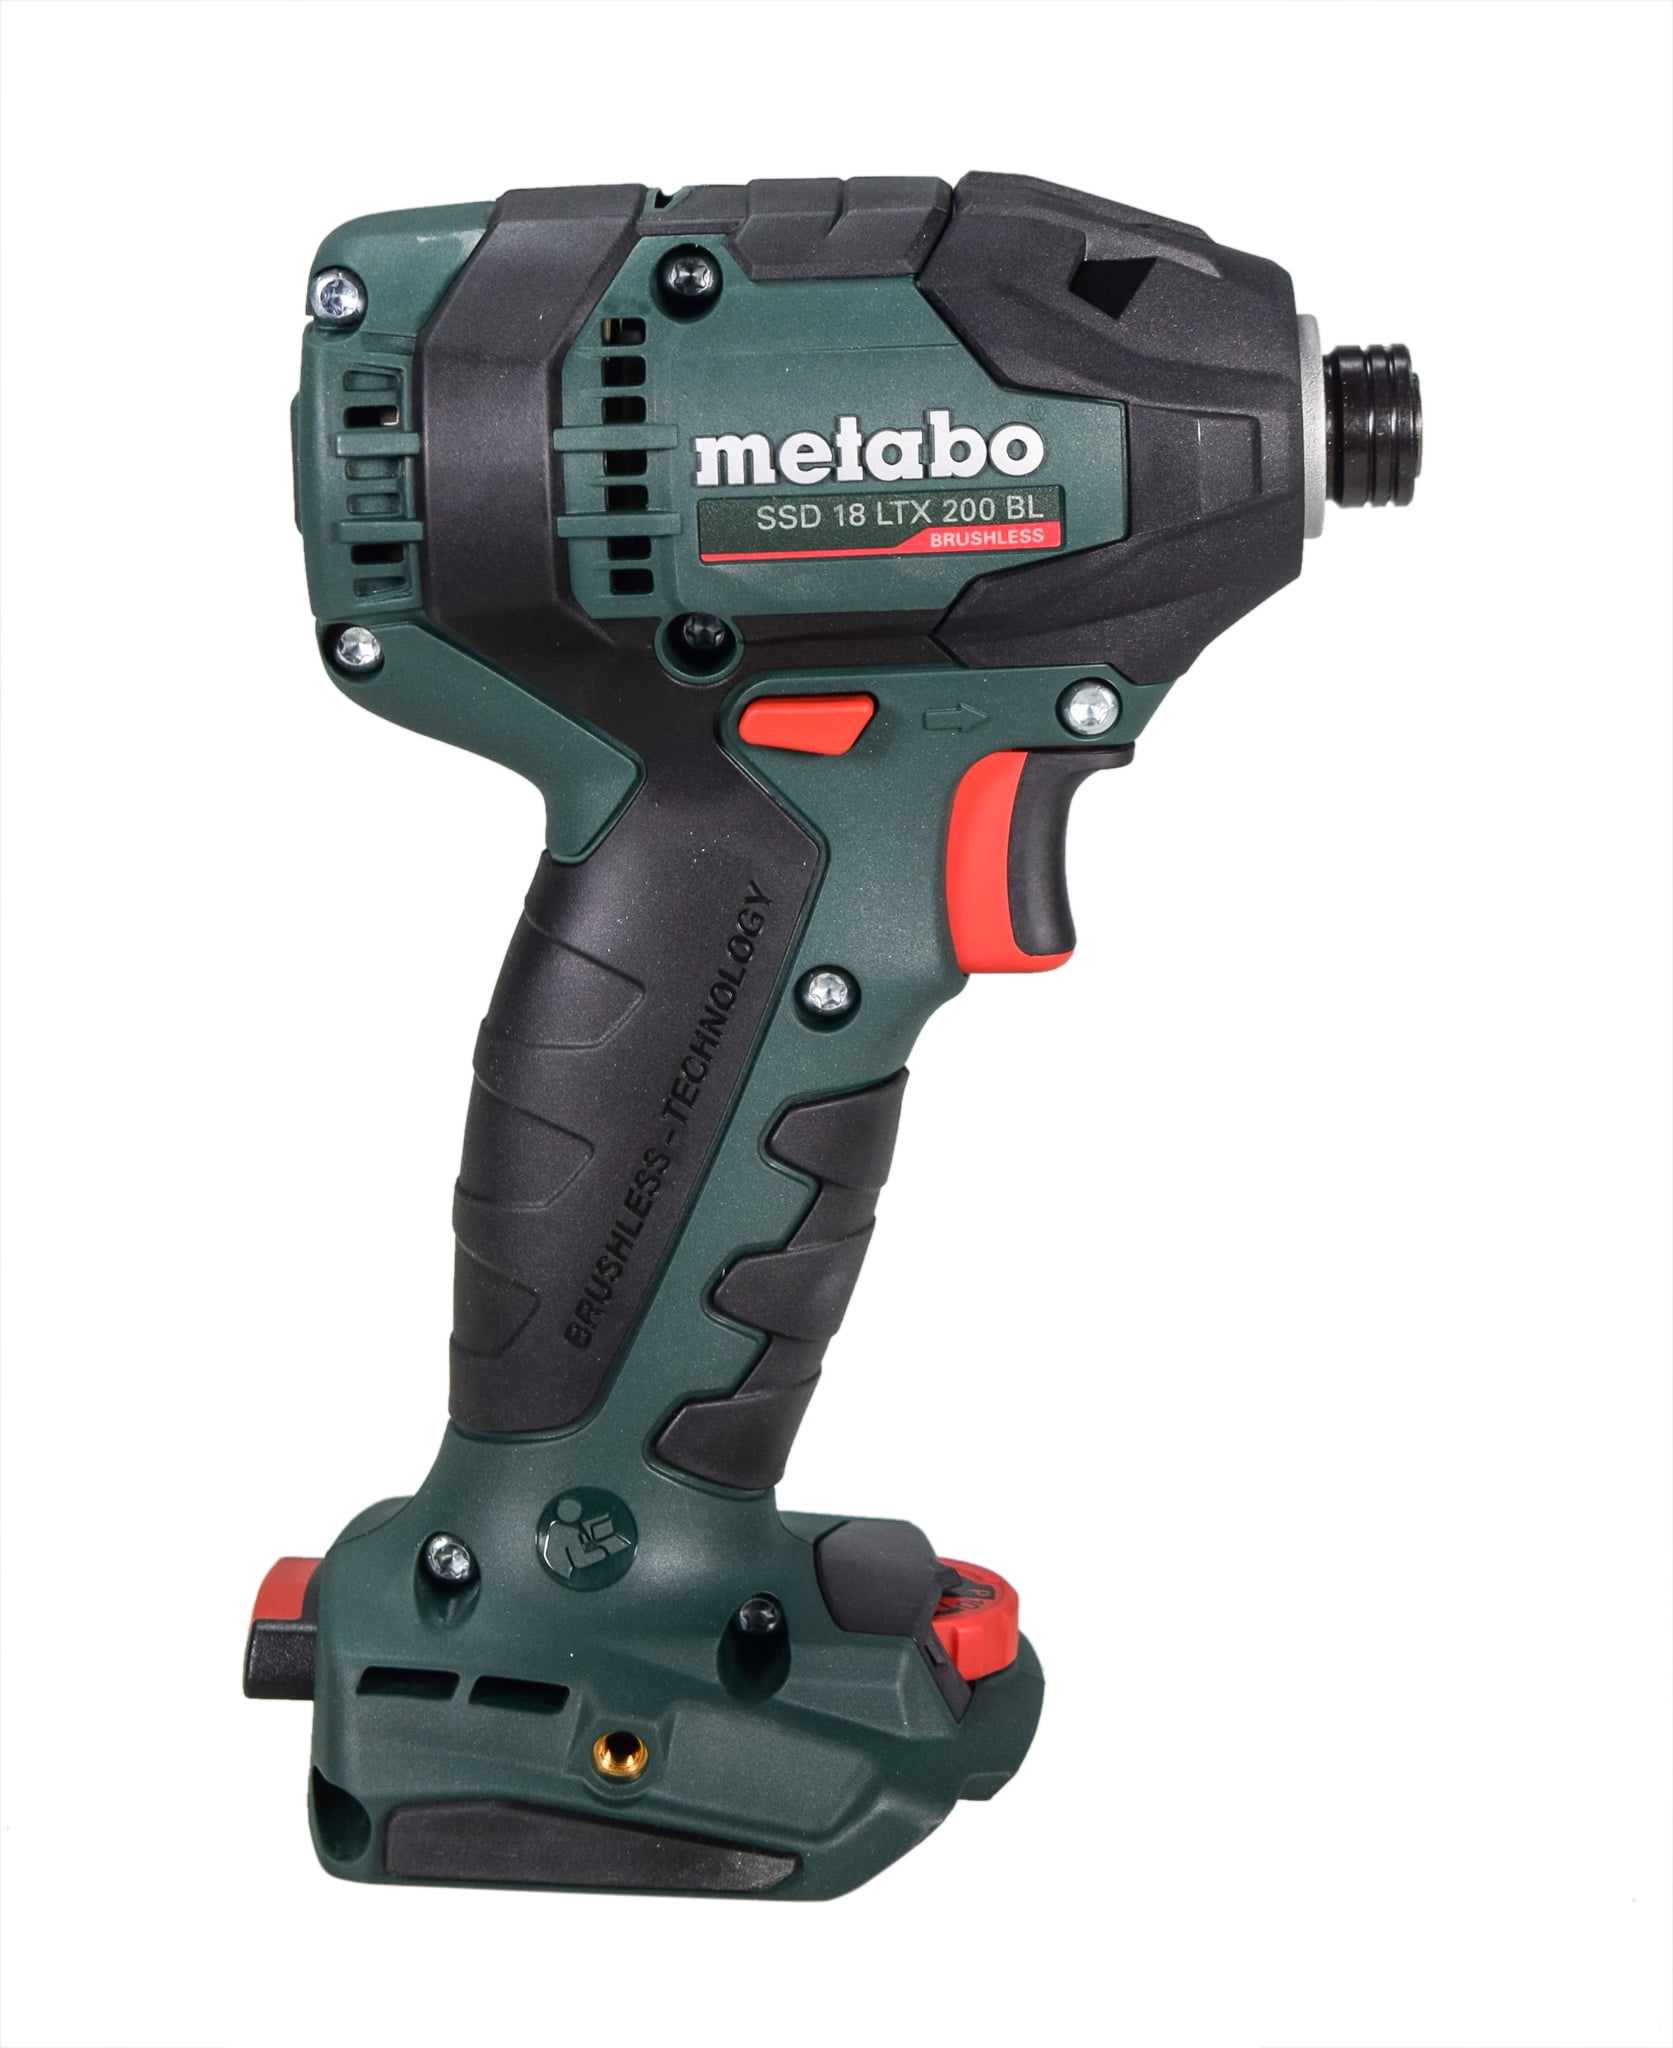 Metabo 602396890 SSD 18 LTX 200 1/4 Hex Brushless Impact Wrench Only) - Walmart.com